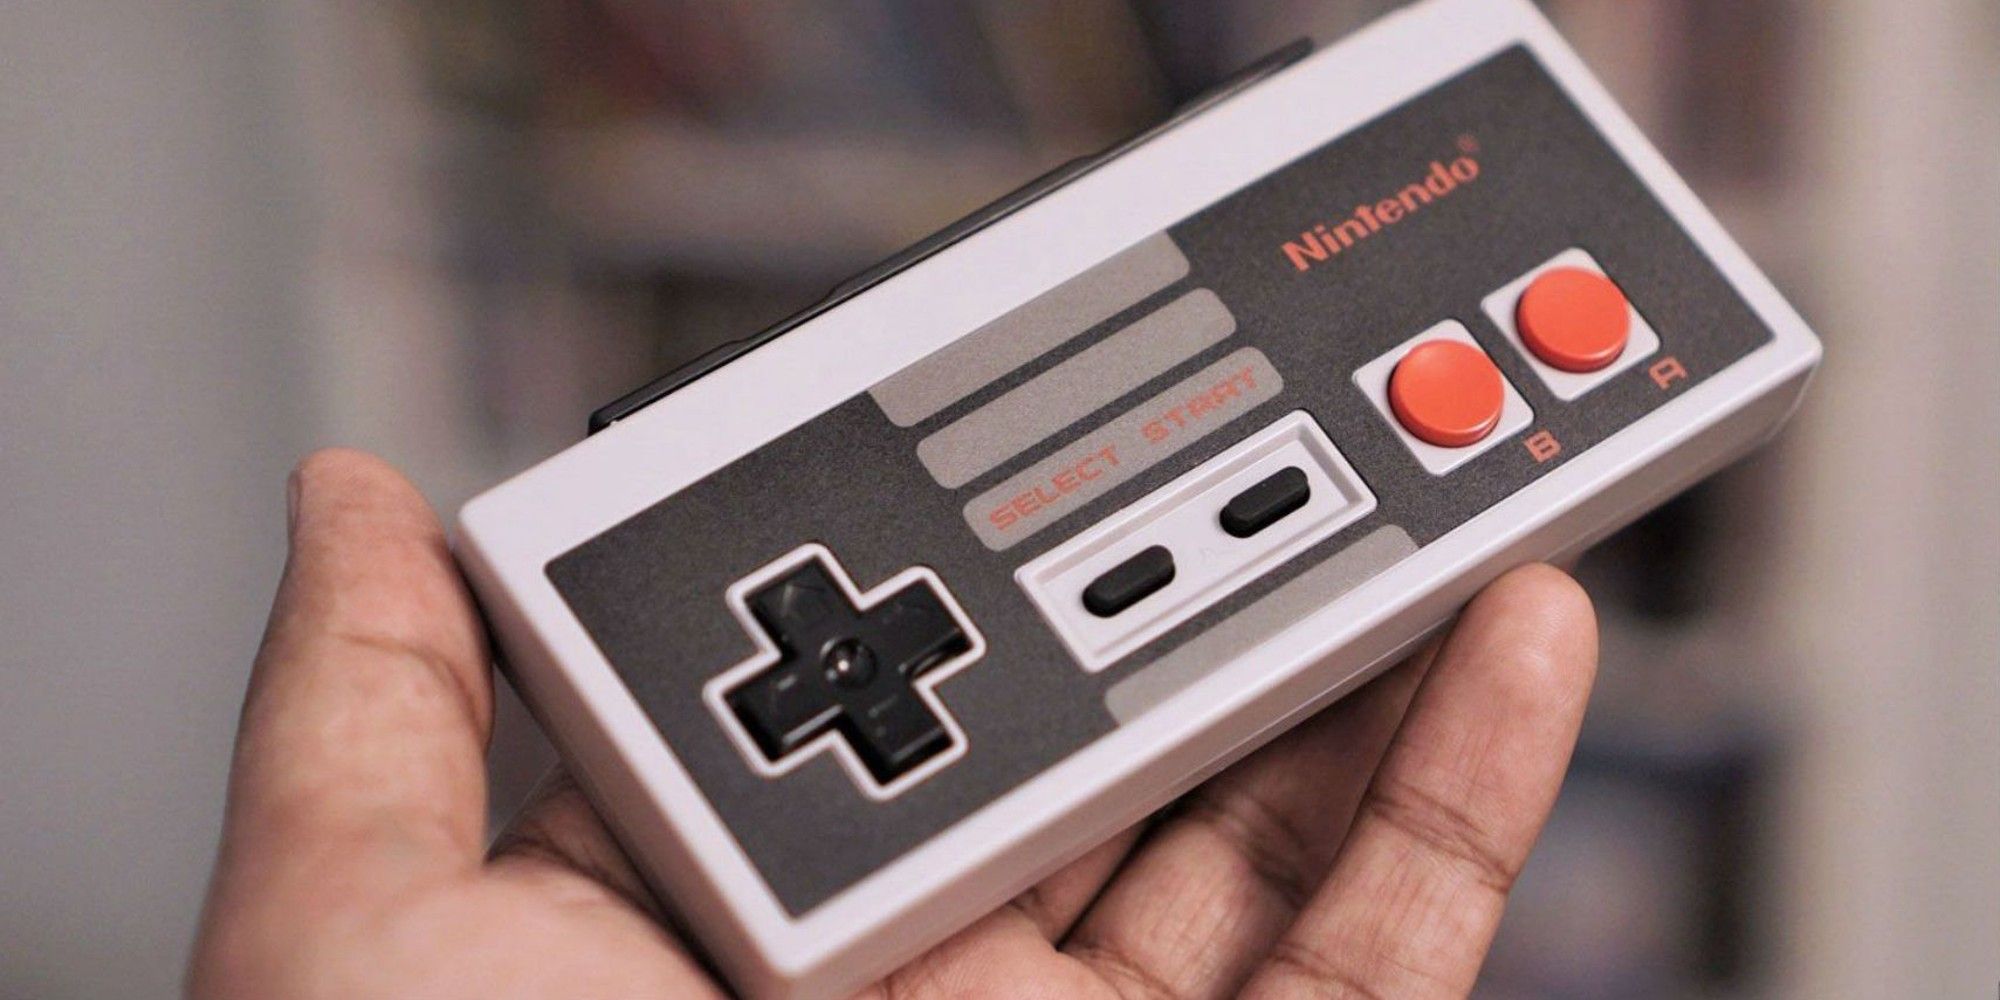 Nintendo Entertainment System Controller being held out